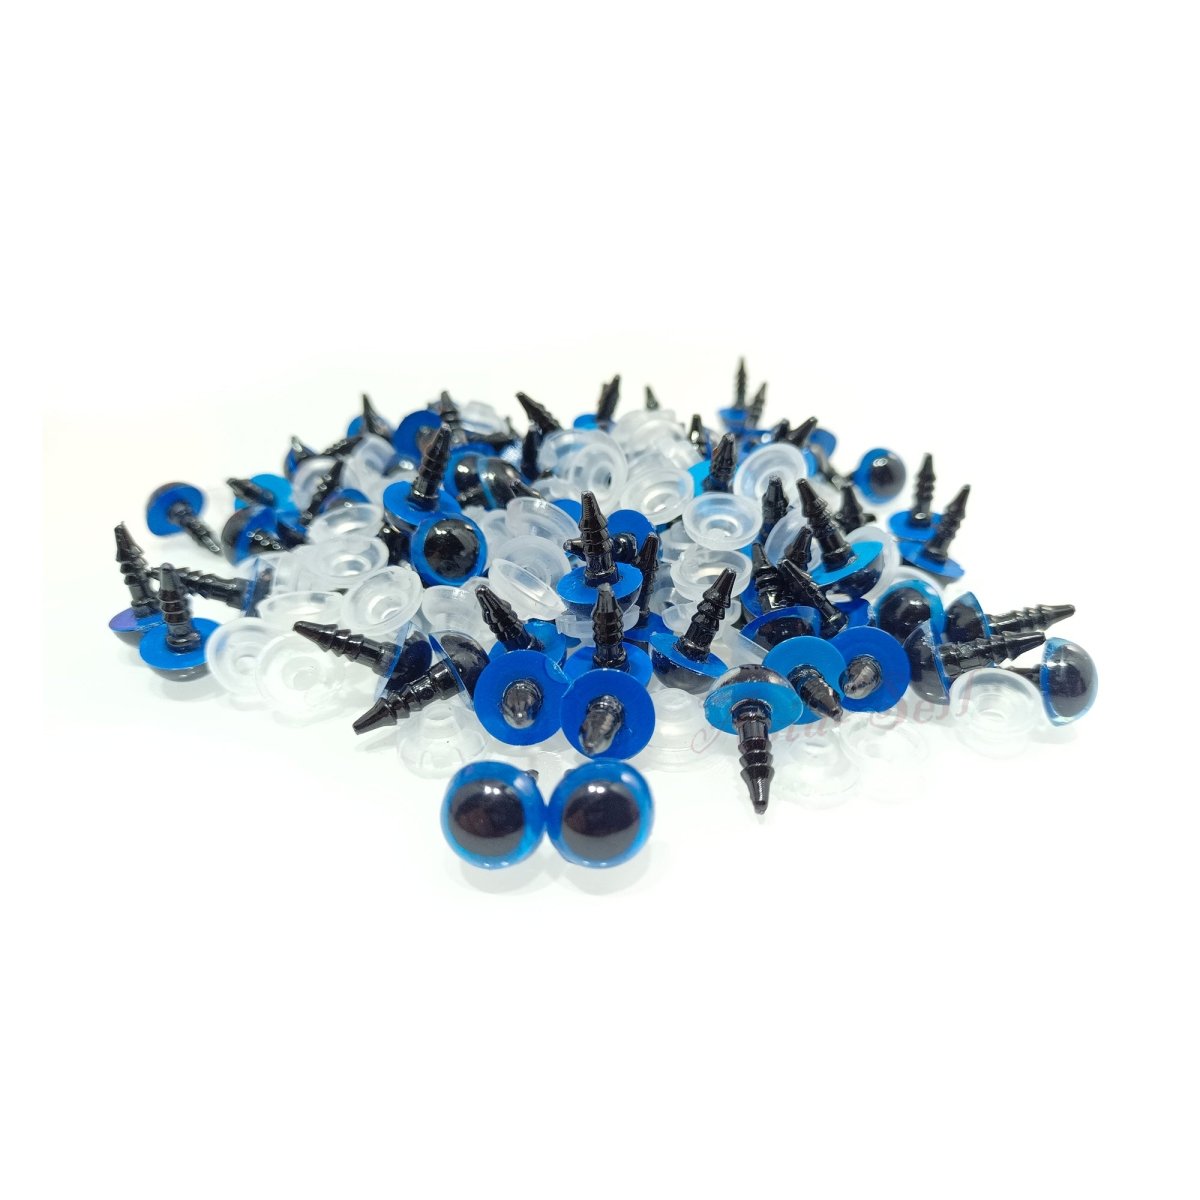 20pcs 10mm Colour Safety Eyes For Teddy Bear Doll Animal Puppet Crafts Plastic Eyes - Blue - - Asia Sell